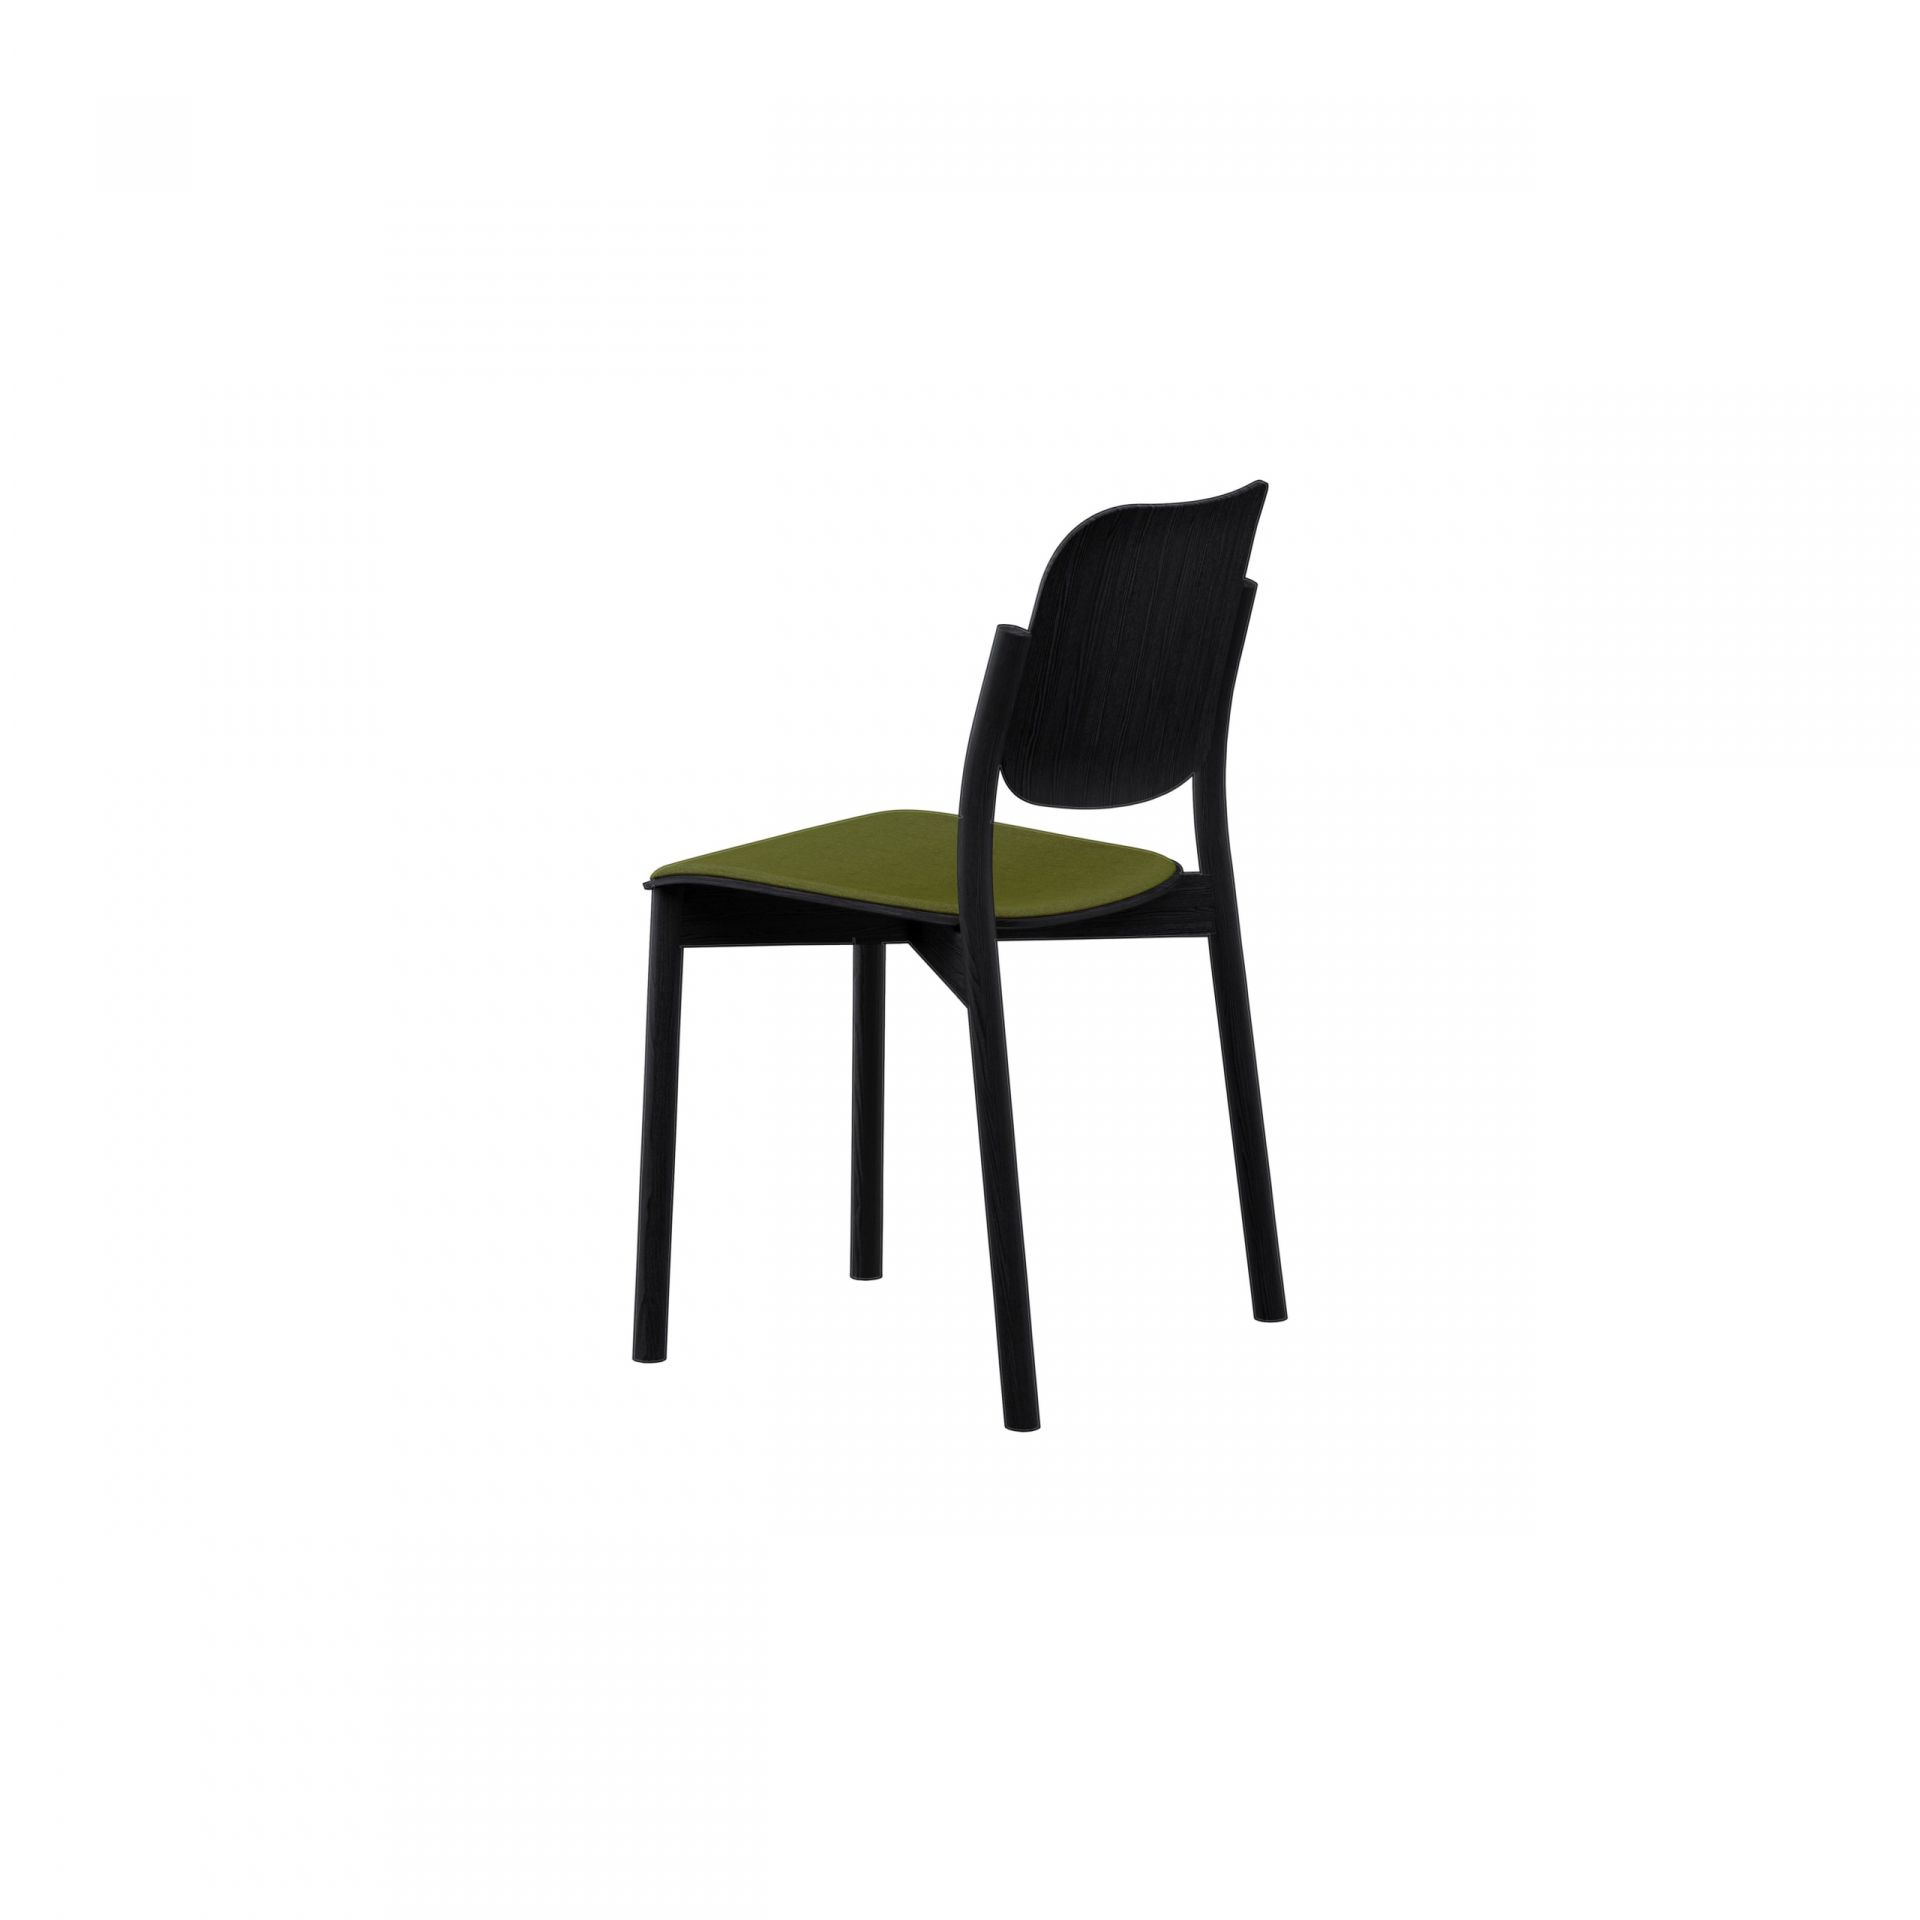 Zoe Wooden chair product image 8